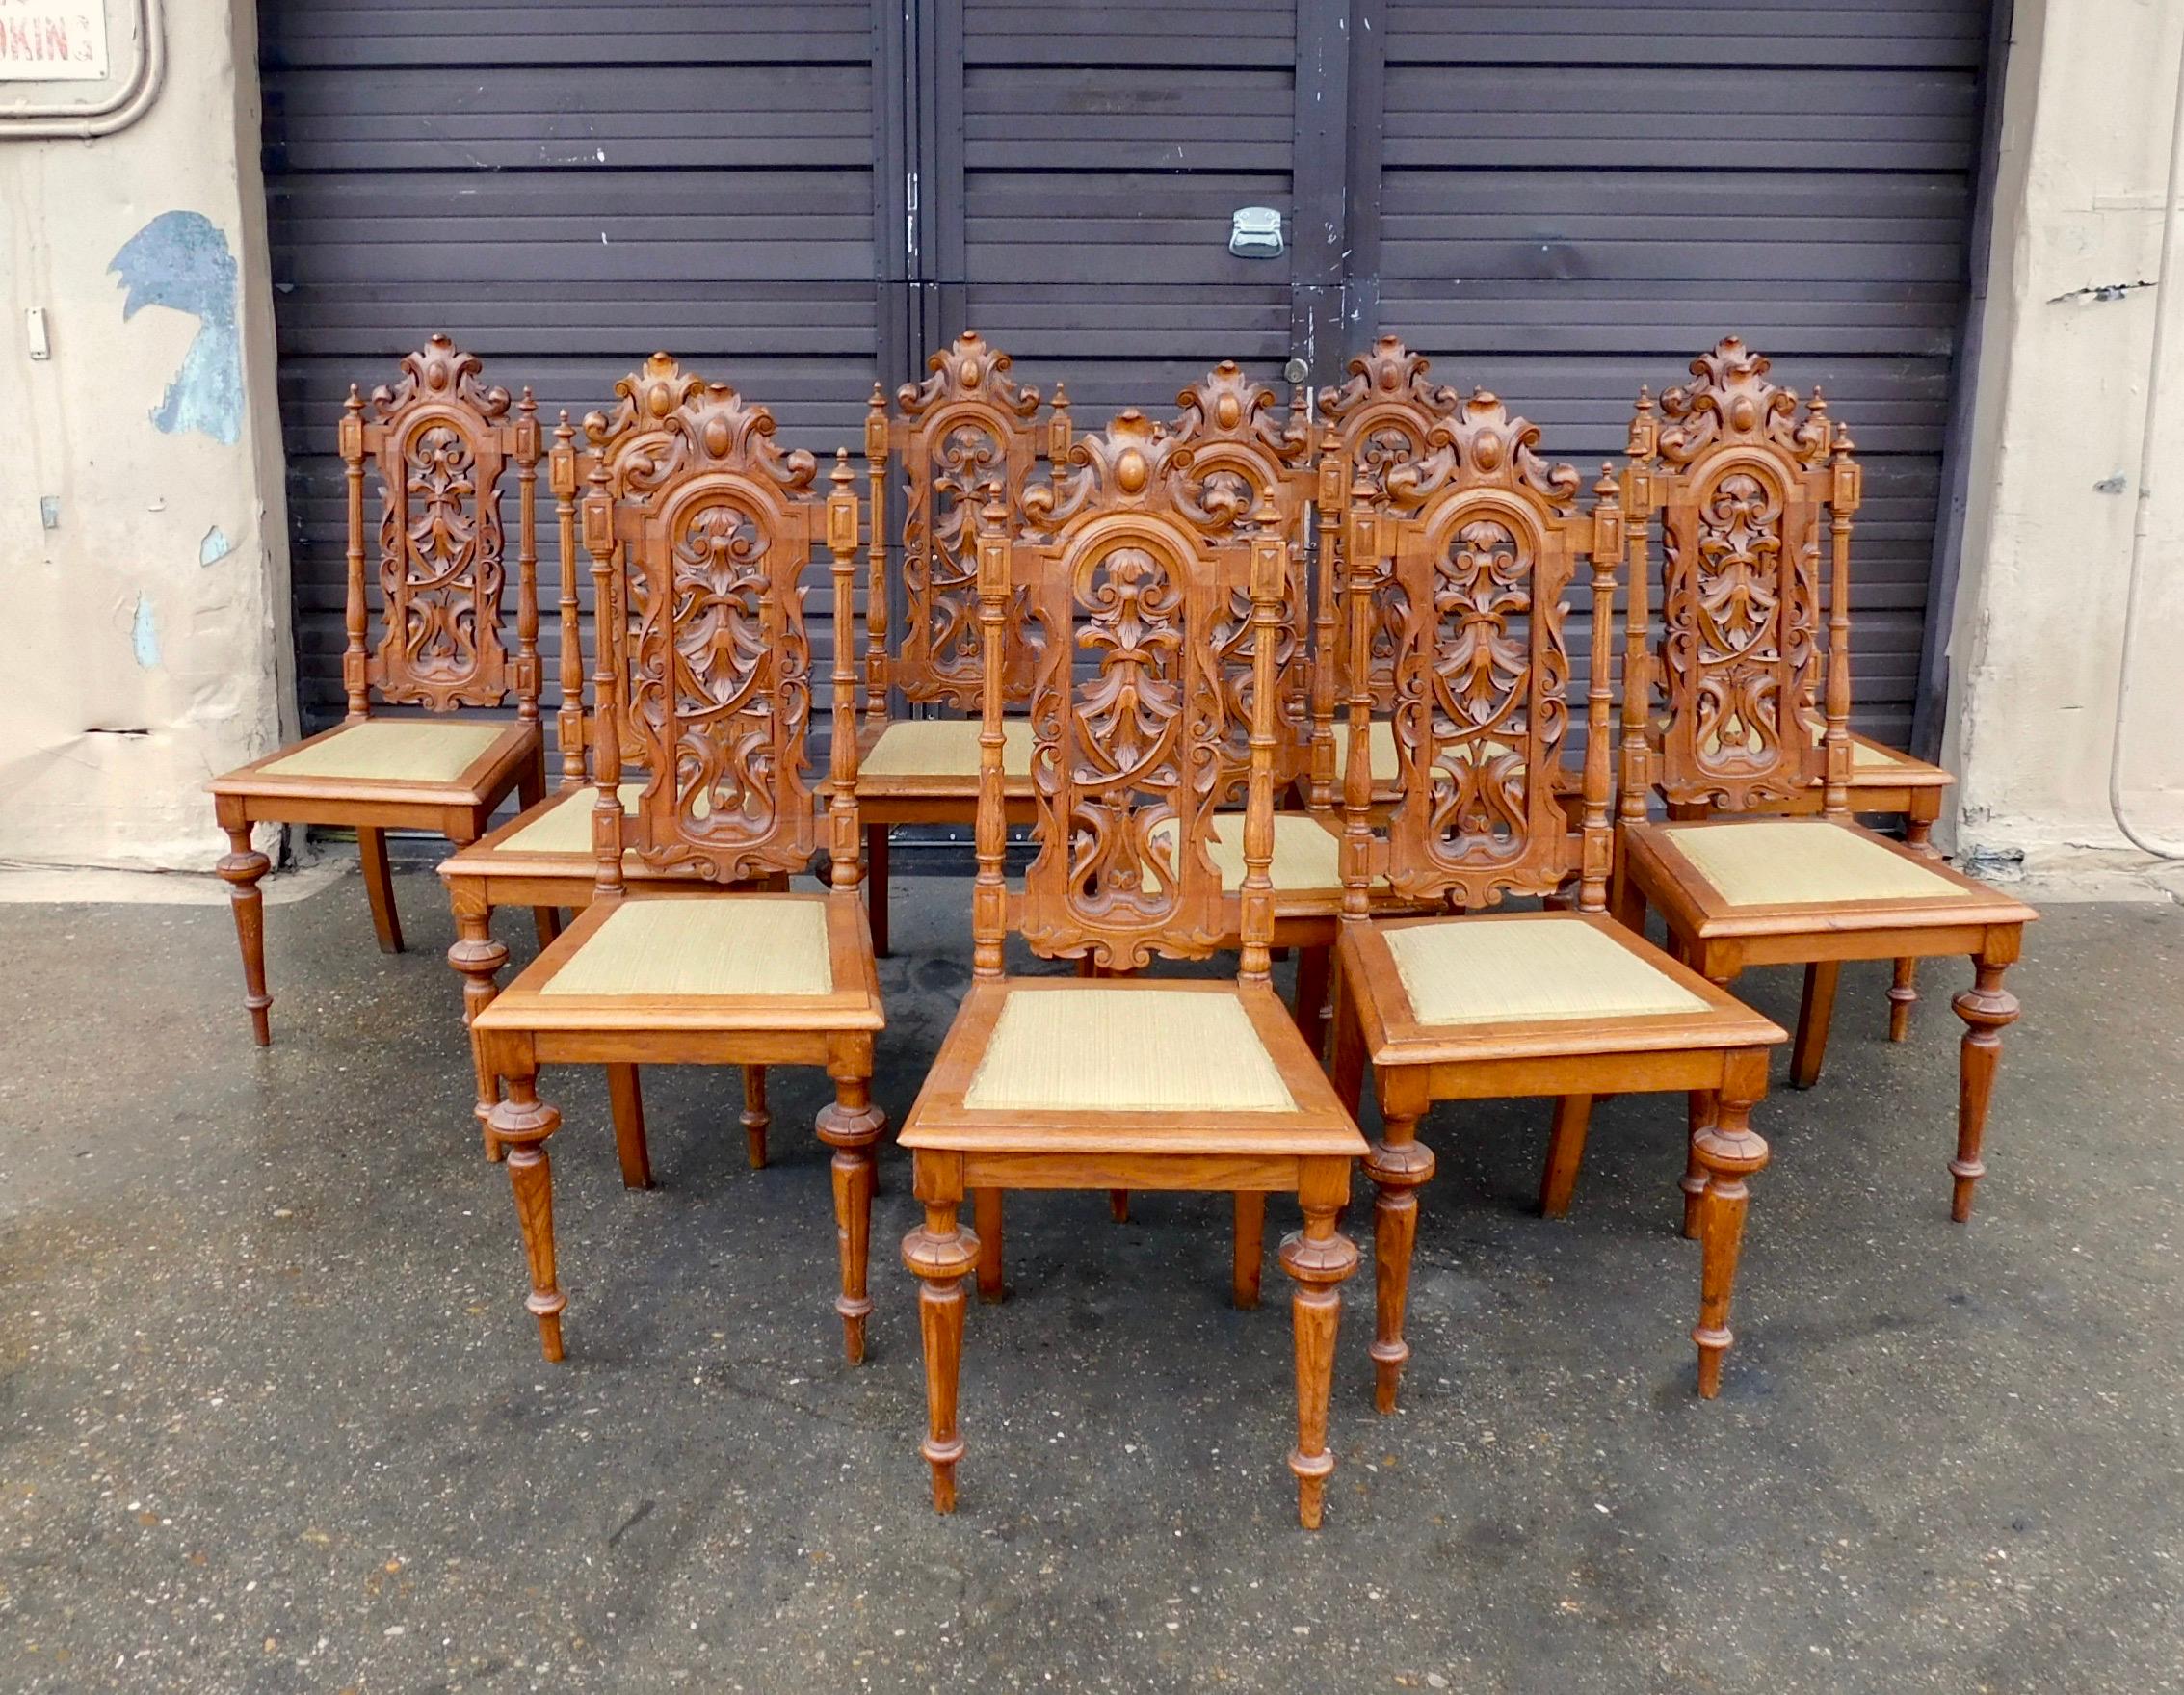 Set of ten Spanish Revival dining chairs in hand crafted oak. Made in Sweden in the 1920s. 
The entire set has just been lightly restored by our woodworkers. All wood joinery is in good condition as are seats and finish. With some signs of age